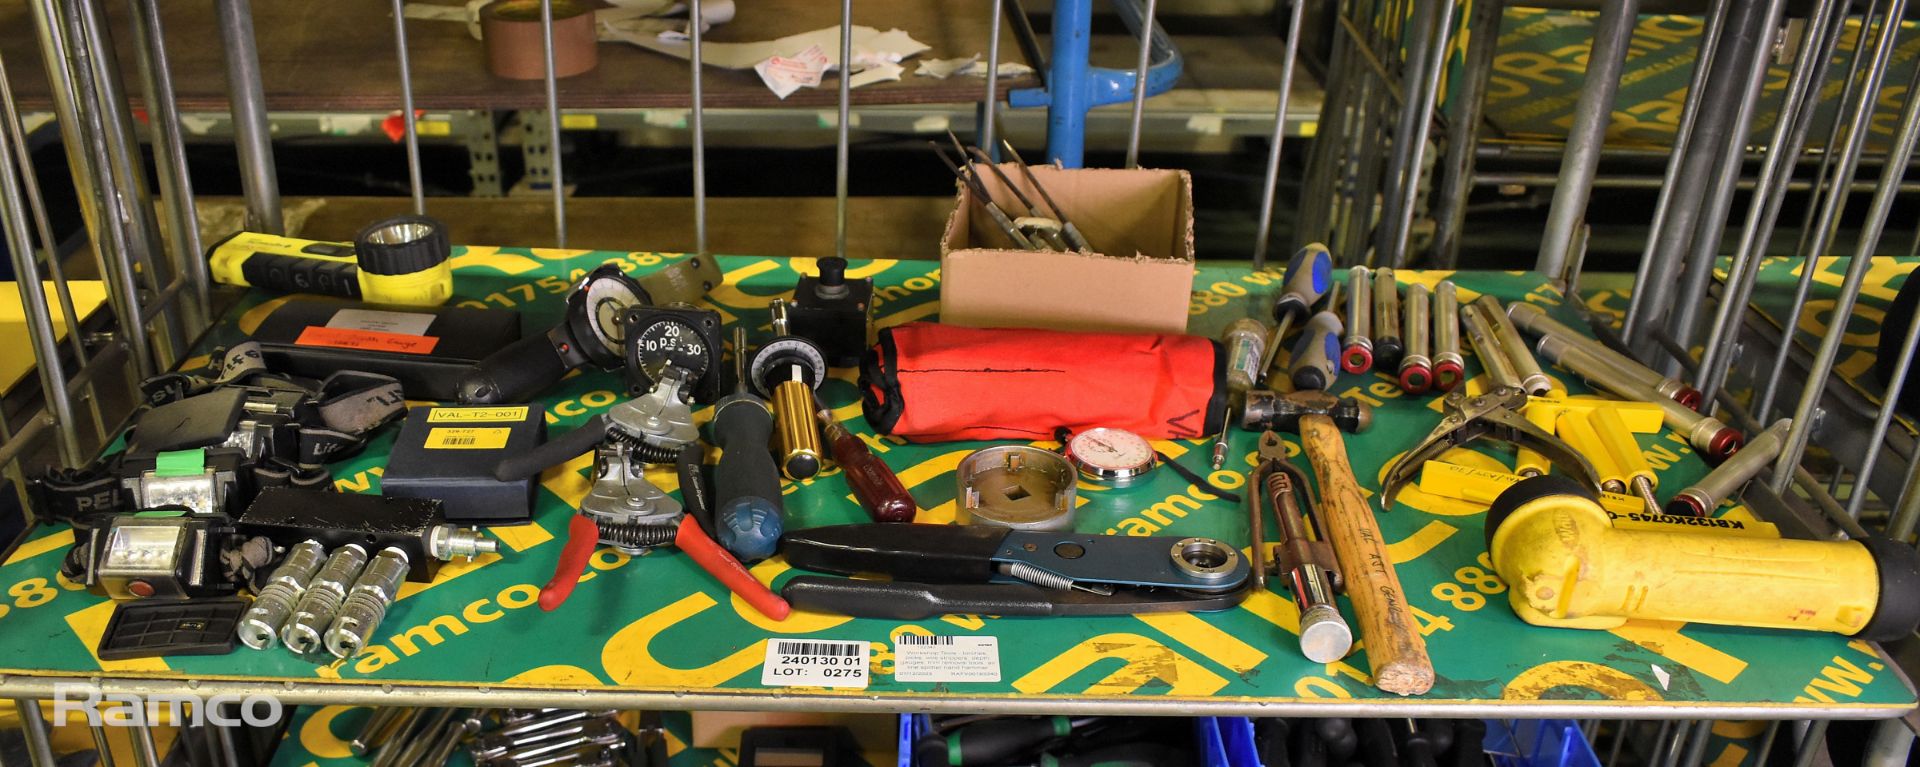 Workshop Tools - torches, picks, wire strippers, depth gauges, trim removal tools, air line splitter